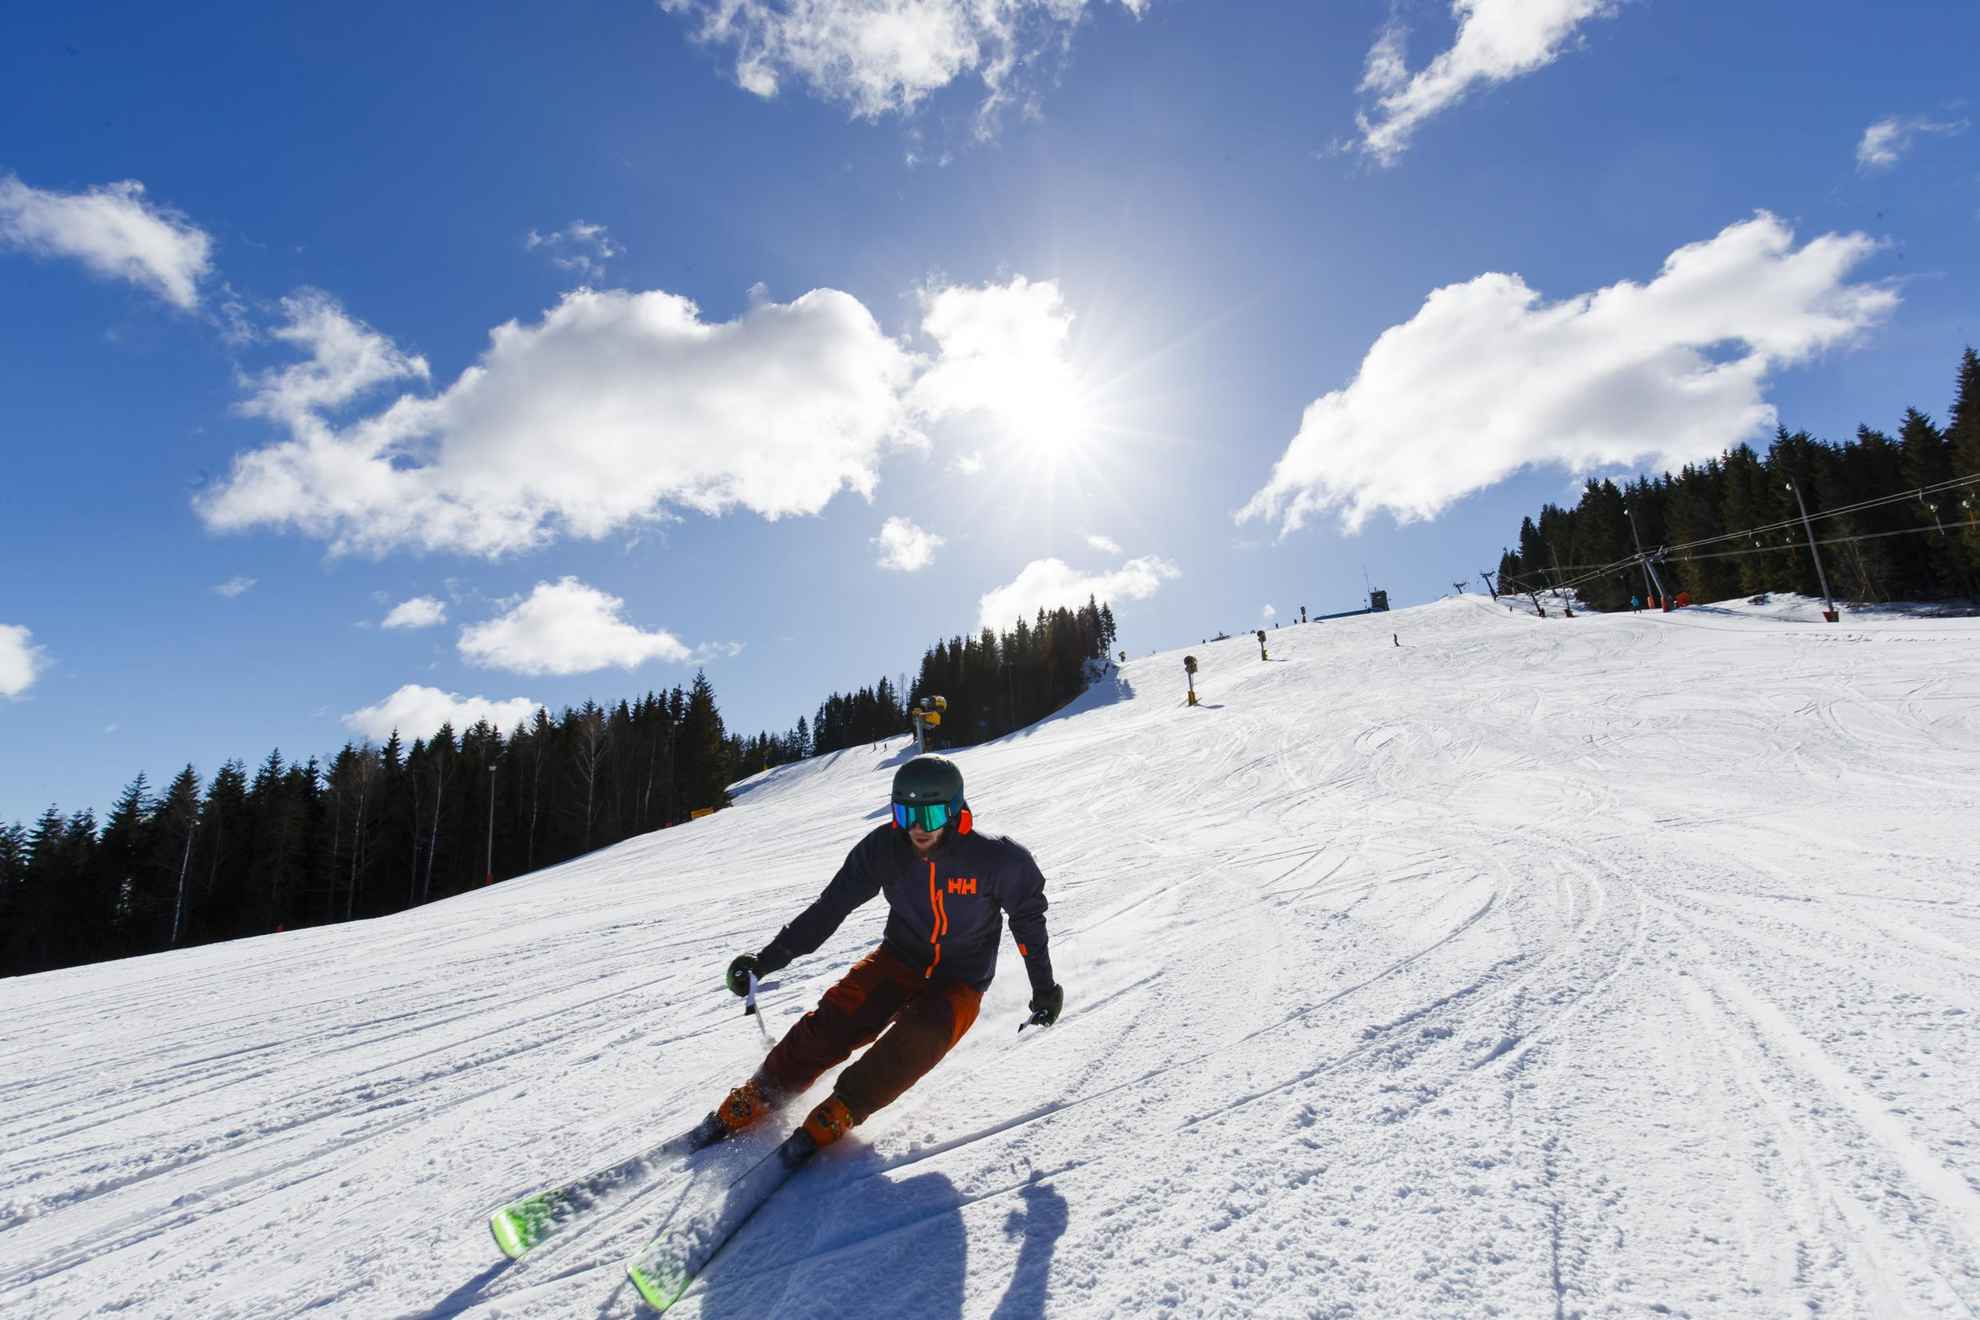 A person alpine skiing on a sunny winter day.